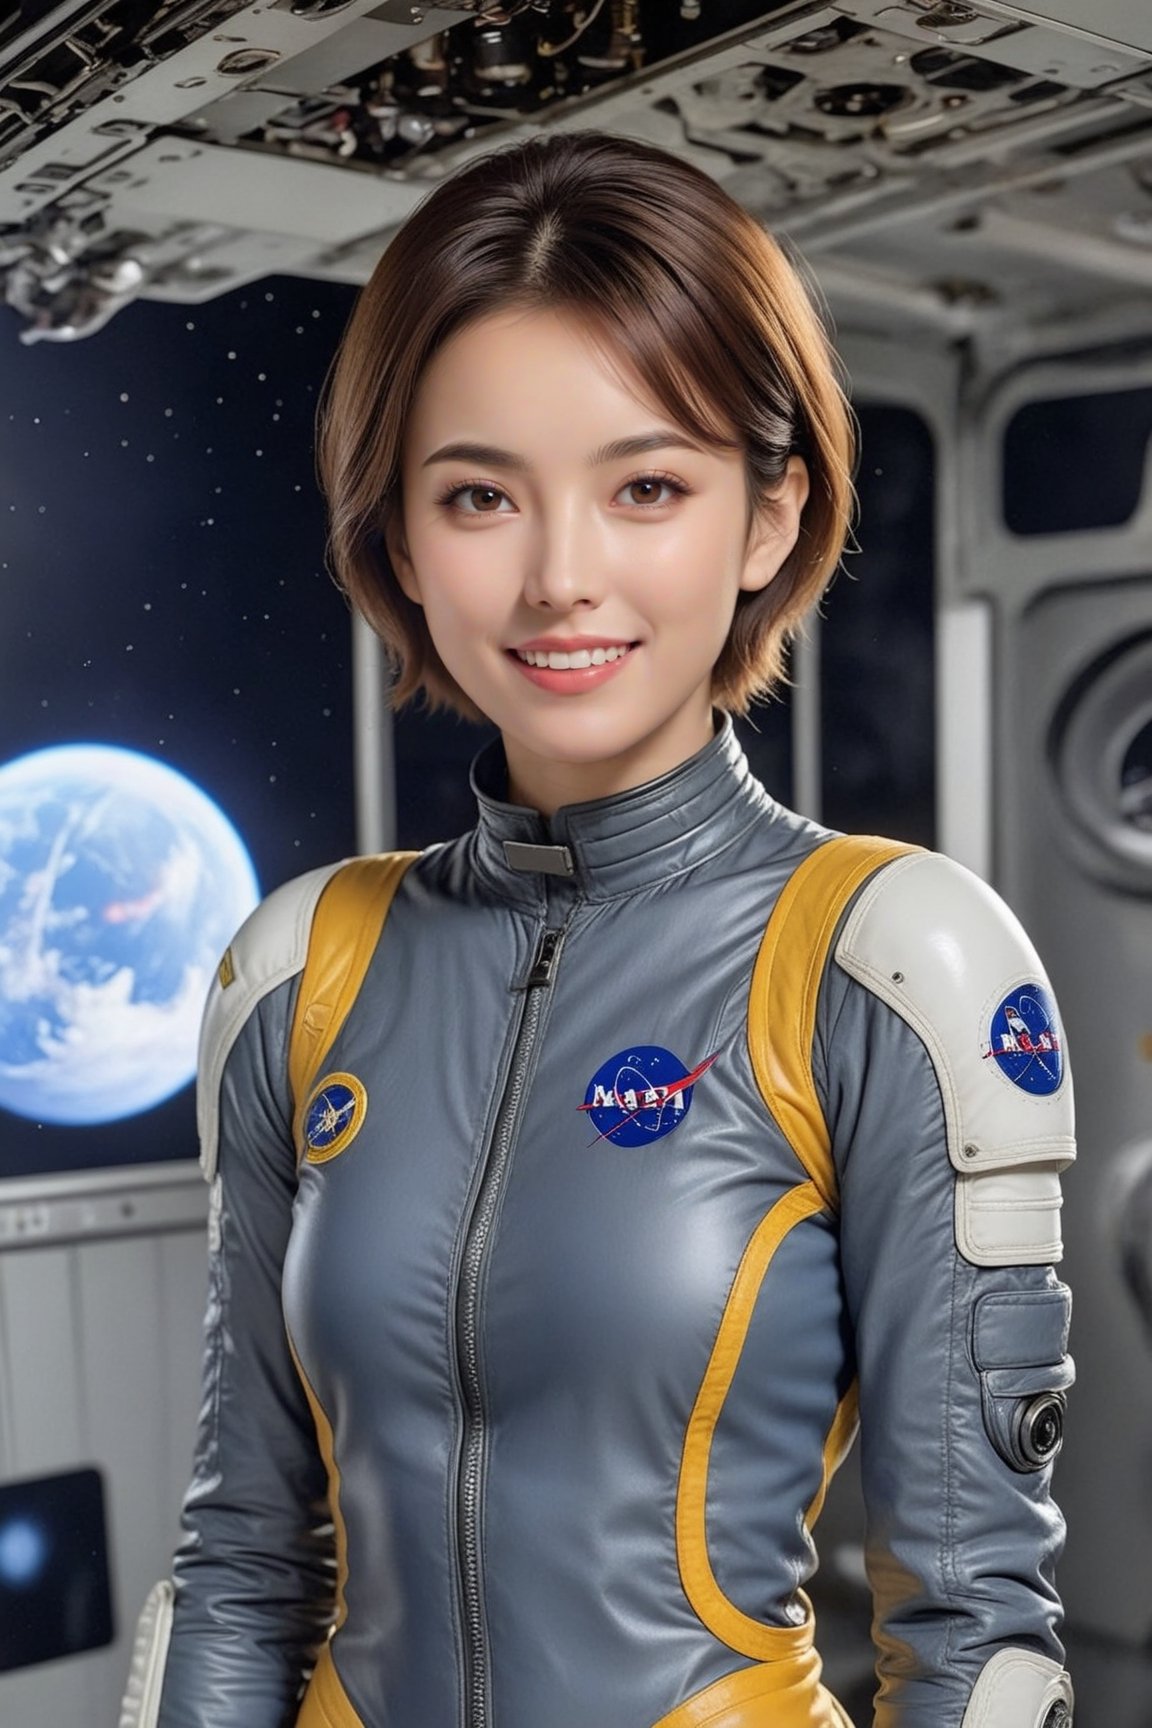 Hyper-Realistic photo of a beautiful girl,20yo,1girl,perfect female form,perfect body proportion,perfect anatomy,space suit,detailed exquisite face,soft shiny skin,smile,mesmerizing,short hair
BREAK
(backdrop of space station,indoors,windows,dark space),(fullbody:1.2),[[cluttered maximalism]]
BREAK
(rule of thirds:1.3),perfect composition,studio photo,trending on artstation,(Masterpiece,Best quality,32k,UHD:1.5),(sharp focus,high contrast,HDR,hyper-detailed,intricate details,ultra-realistic,award-winning photo,ultra-clear,kodachrome vintage:1.3),(chiaroscuro lighting,soft rim lighting:1.2),by Karol Bak,Gustav Klimt and Hayao Miyazaki, photo_b00ster,real_booster, art_booster,han-hyoju-xl